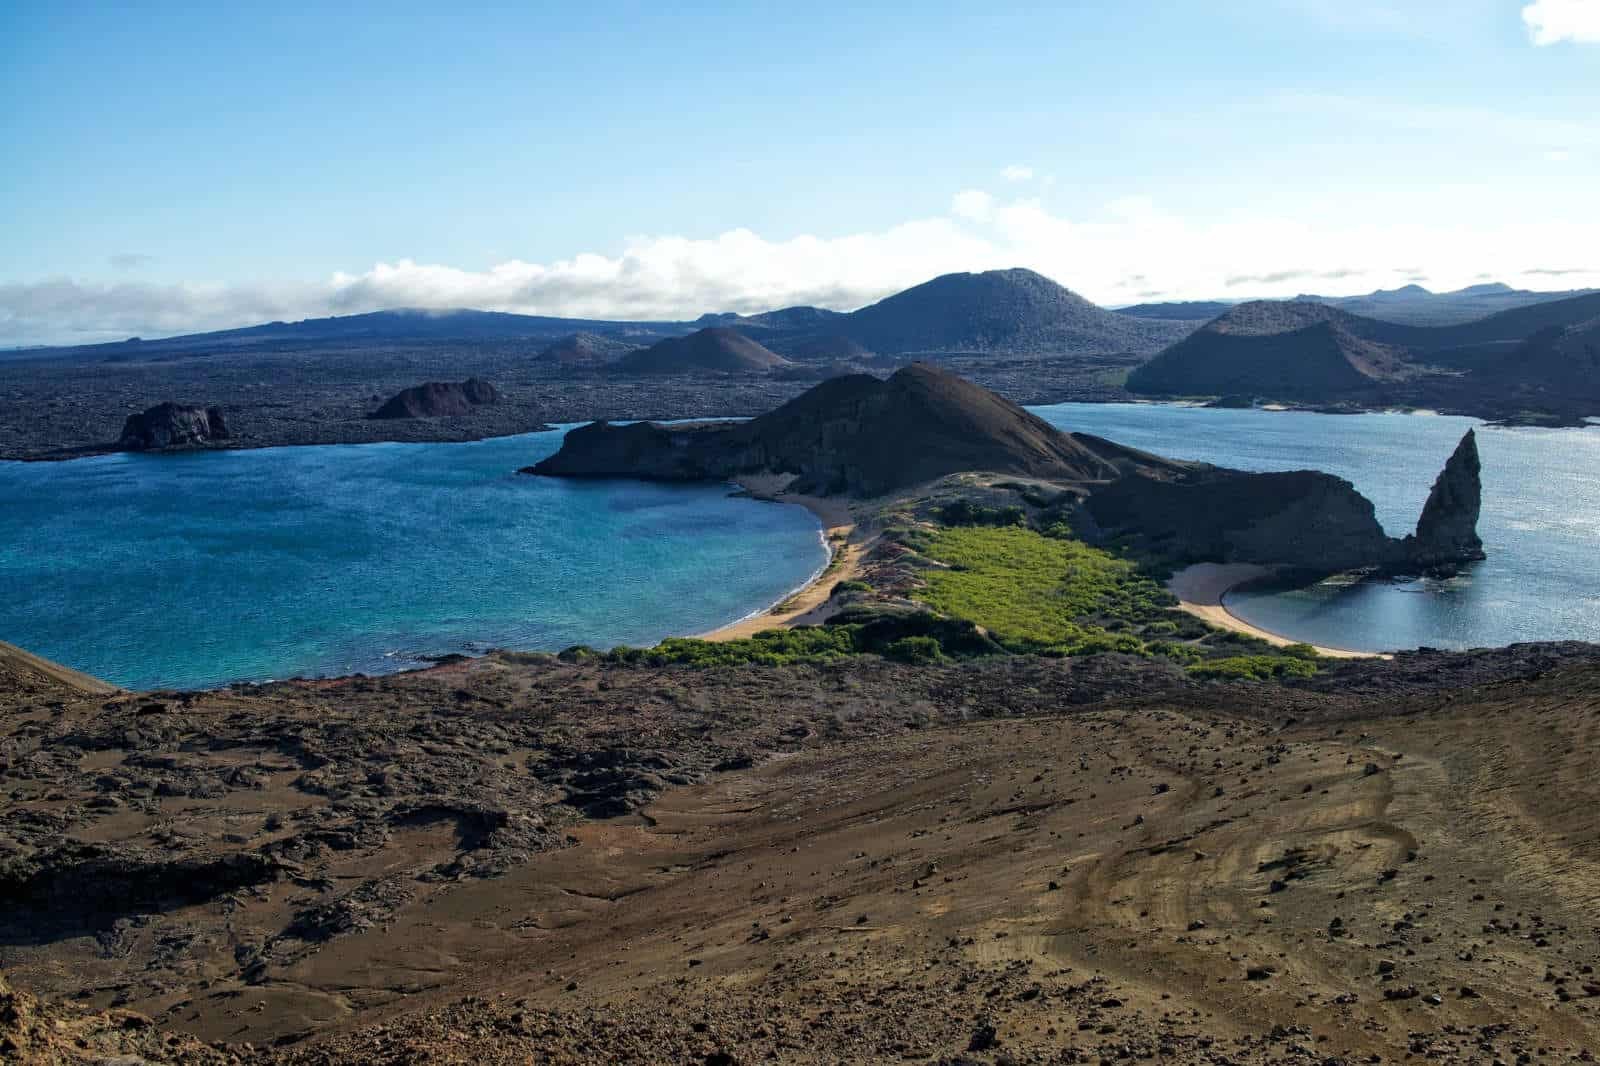 Landscape of Galapagos